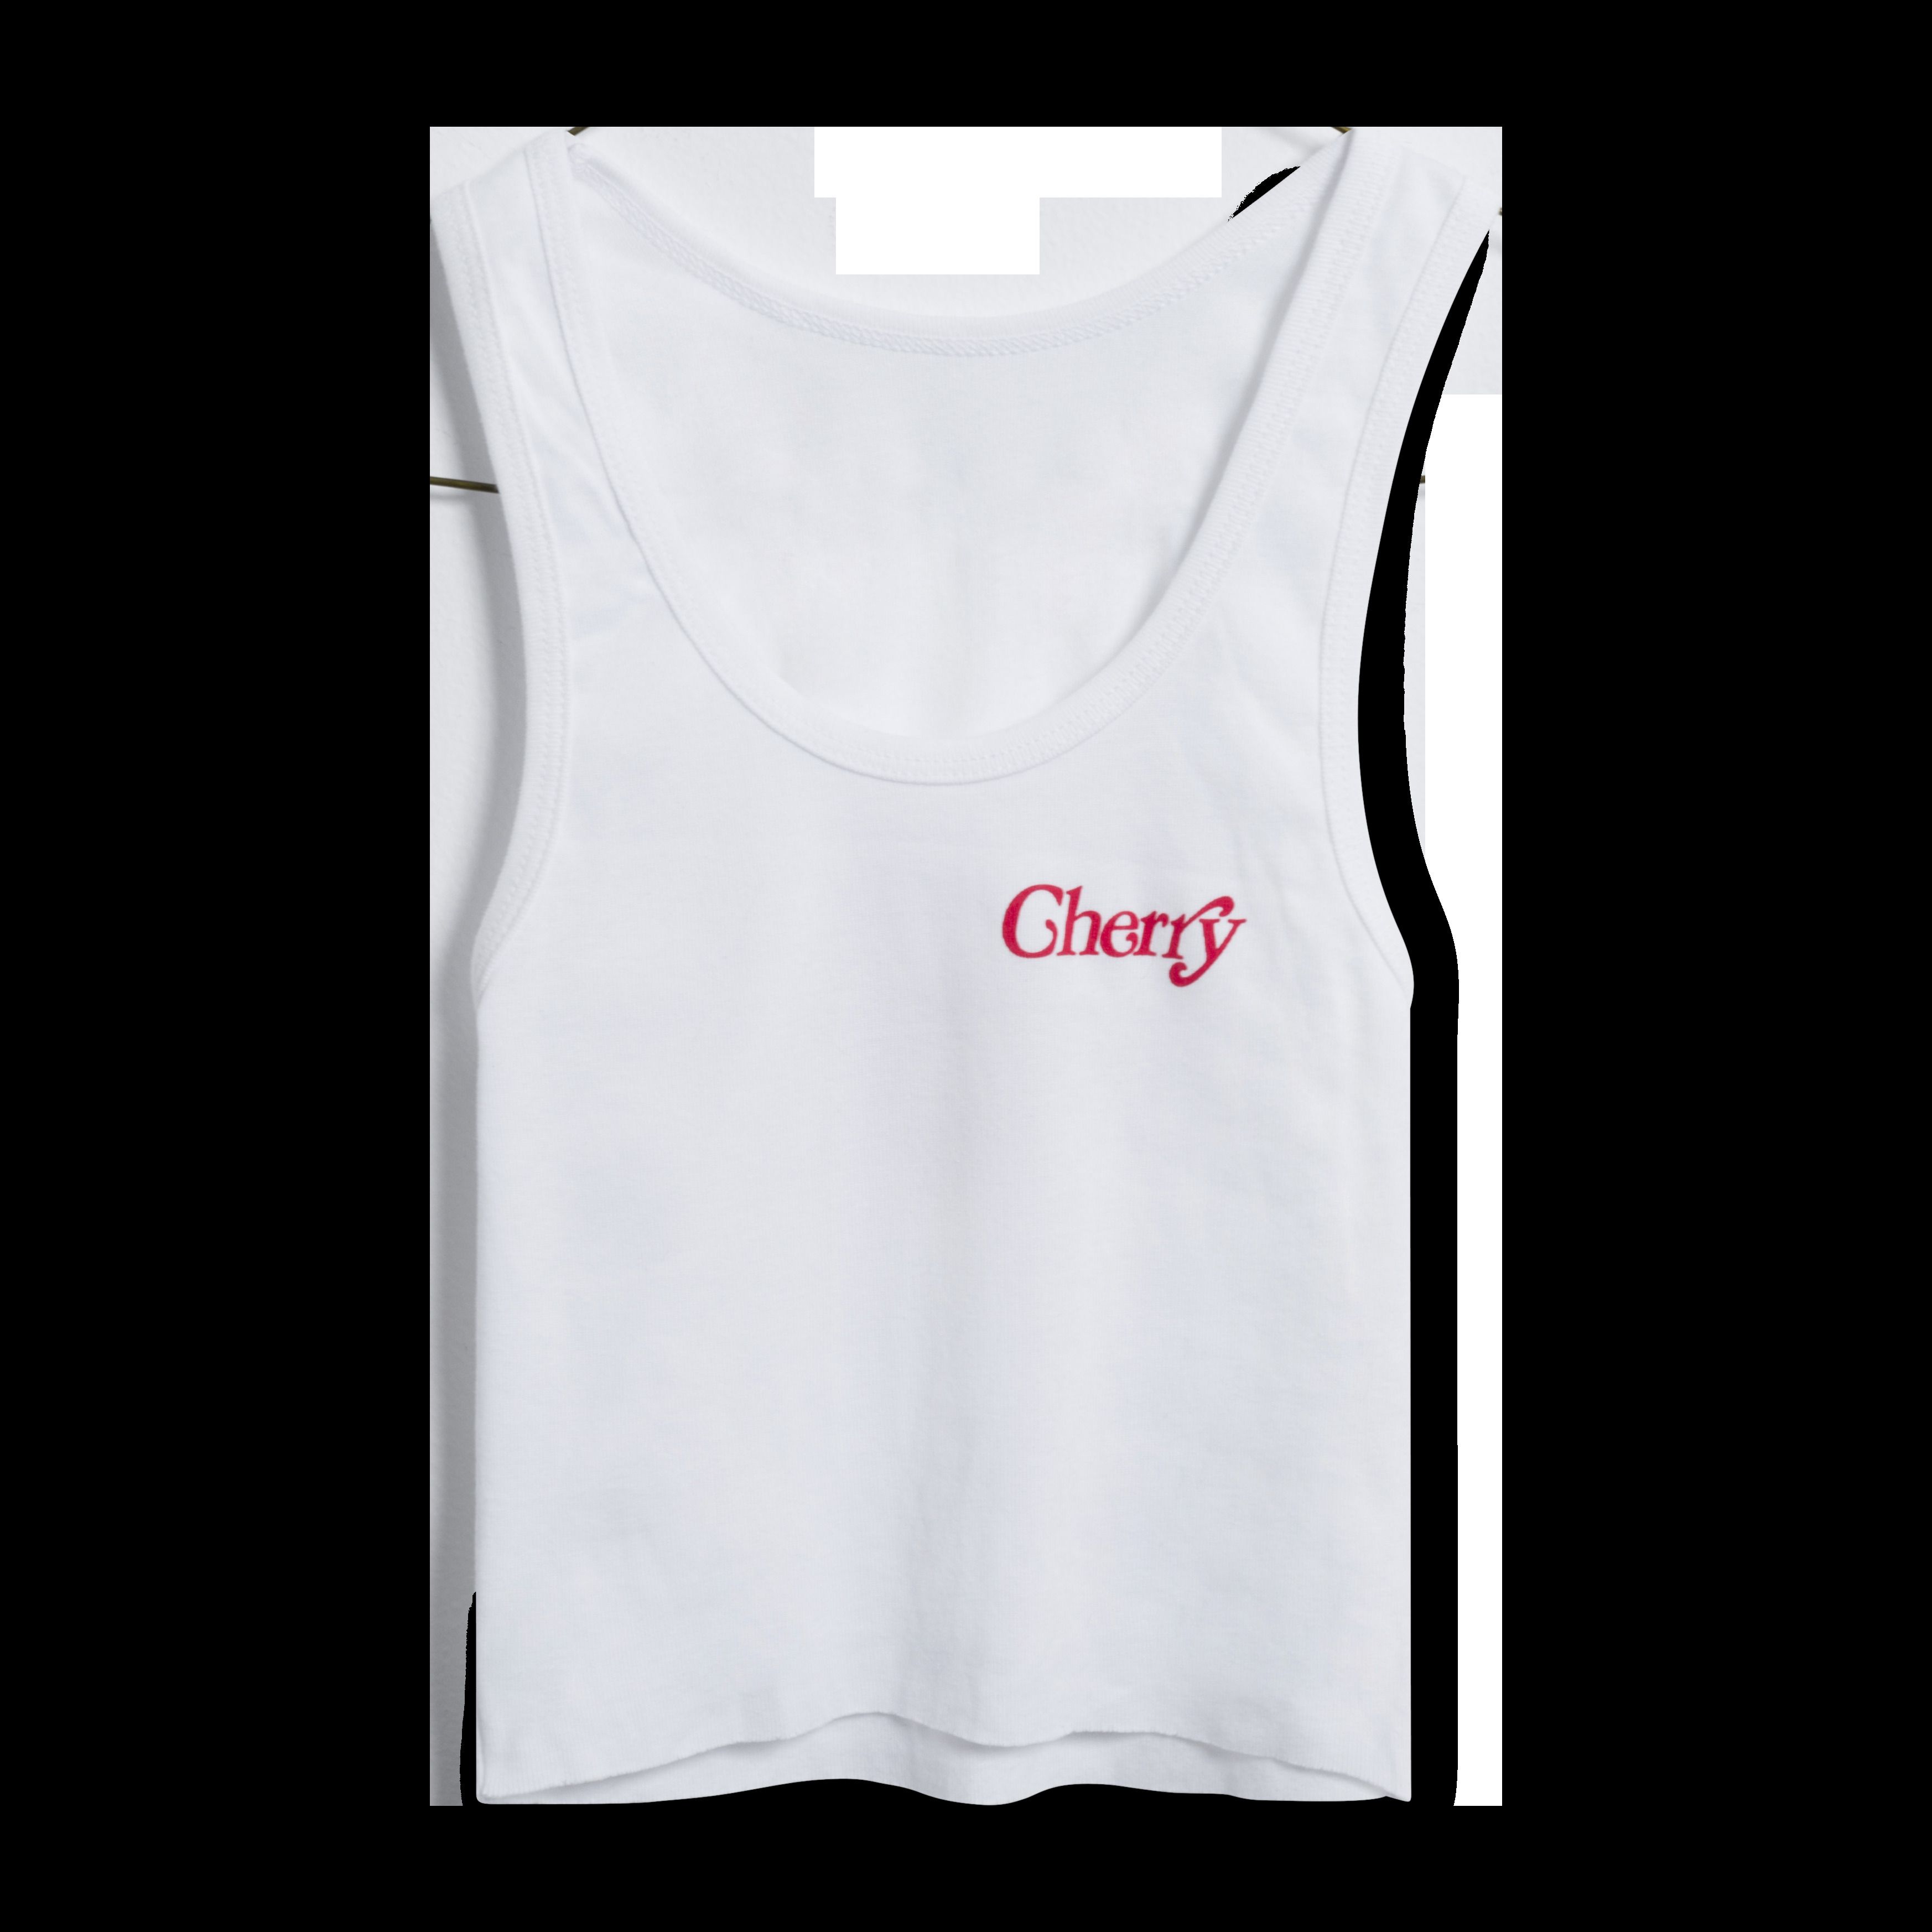 Cherry Los Angeles x Girls Don't Cry Crop Tank by Cailin Russo 